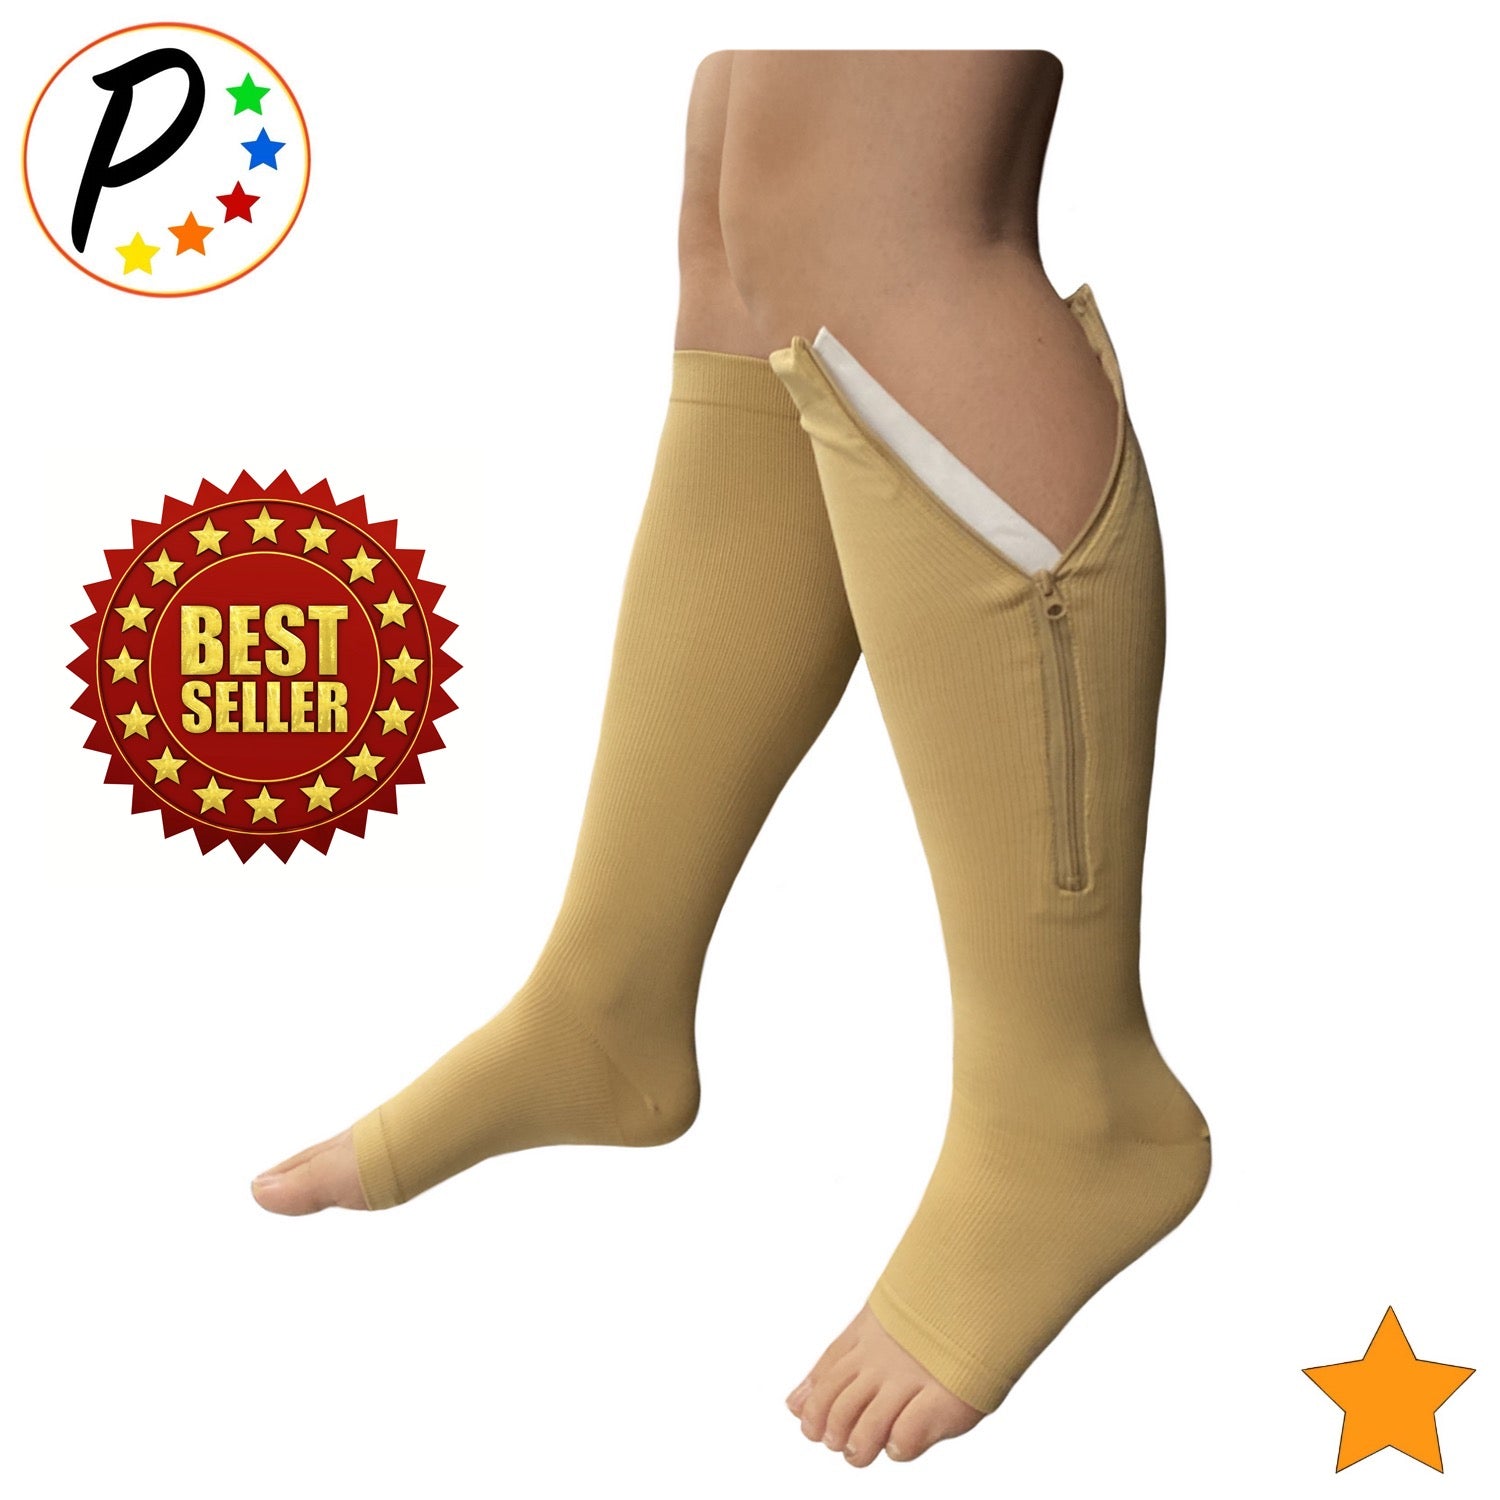 Medical Zippered Compression Socks - Open Toe 15-20 mmHg Varicose Veins  Compression Stockings with Zip Guard for Skin Protection, Lightweight  Diabetic